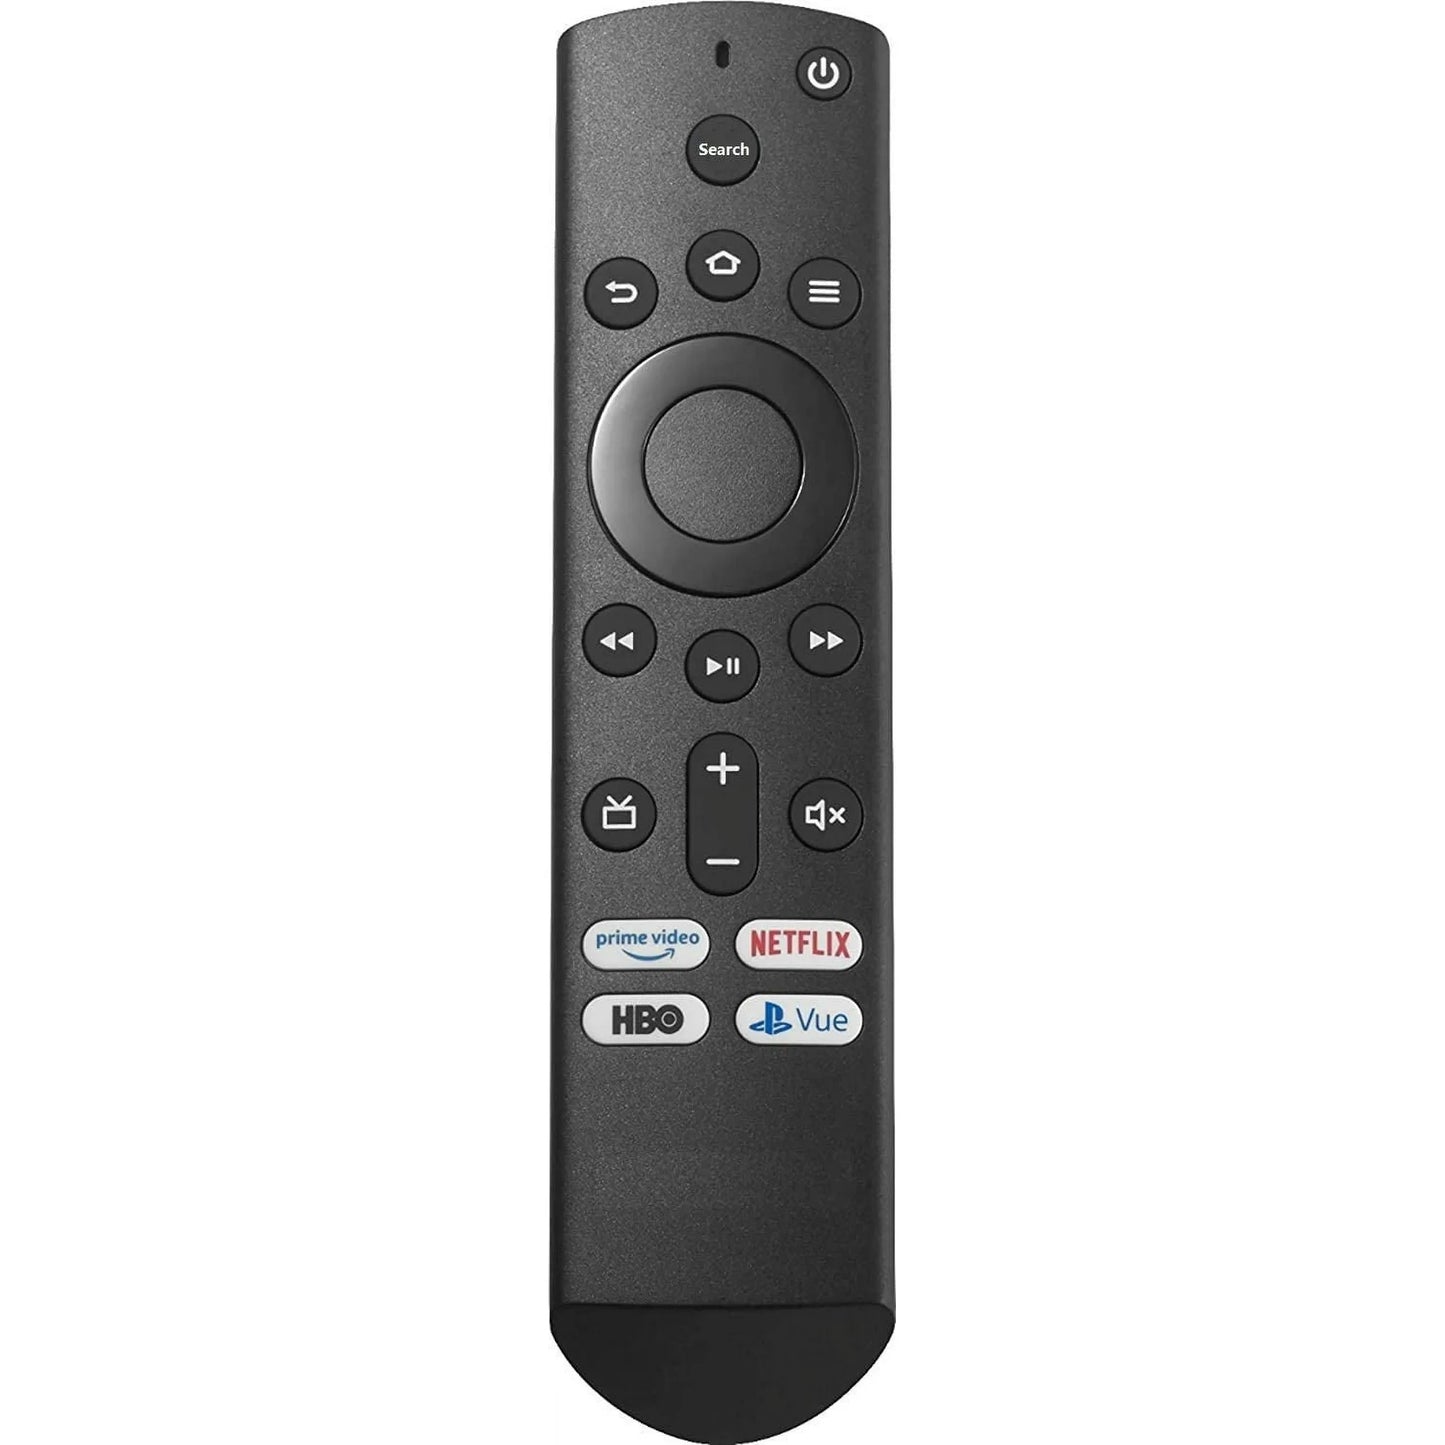 Replacement TV Remote for Insignia or Toshiba Fire/Smart TV Edition 49LF421U19 50LF621U19 55LF621U19 TF-43A810U21 NS-24DF310NA21 NS-39DF310NA21 NS-39DF510NA19 NS-43DF710NA19 [No Voice Search]